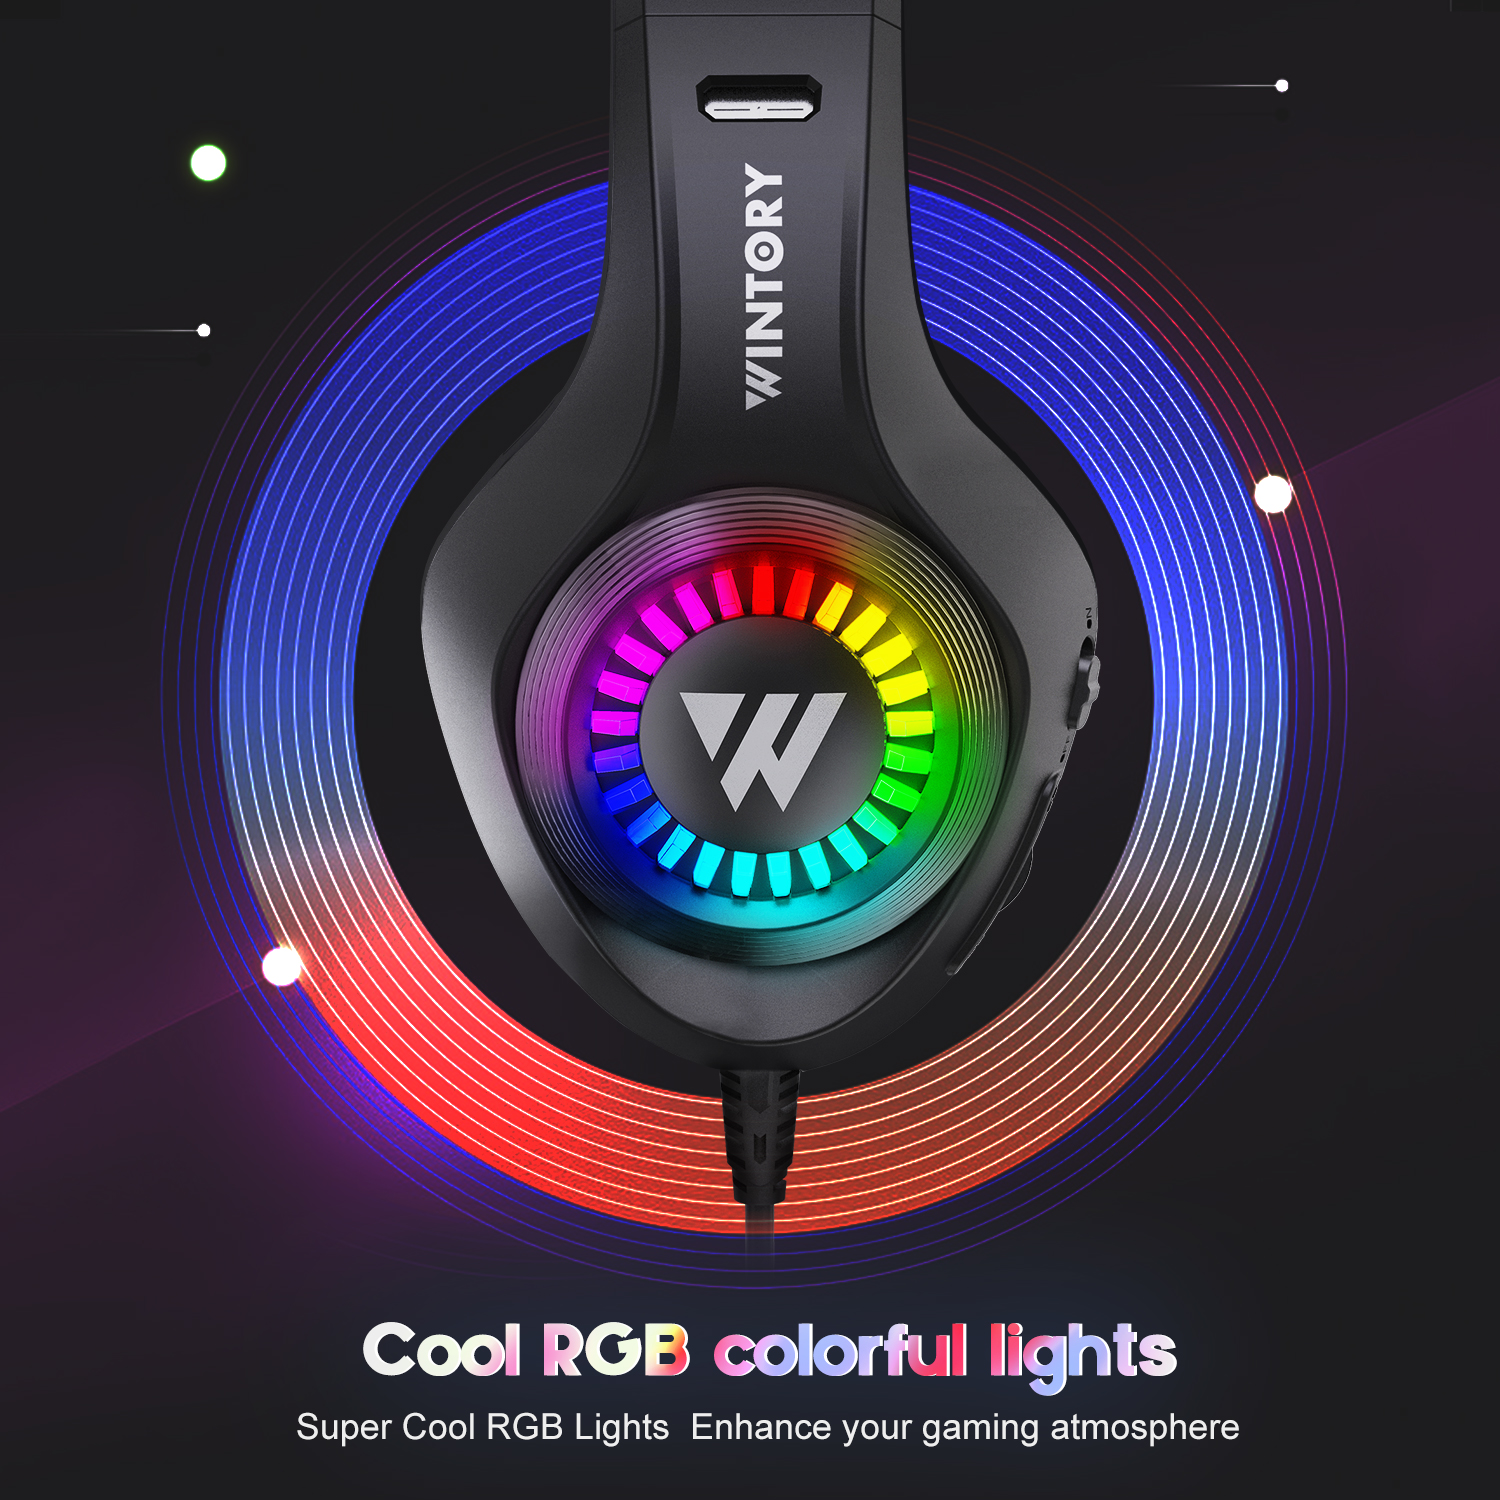 Wintory-M3-Gaming-Headset-Stereo-RGB-Light-50mm-Driver-Stereo-Adjustable-Noise-Canceling-Headphone-w-1910974-6